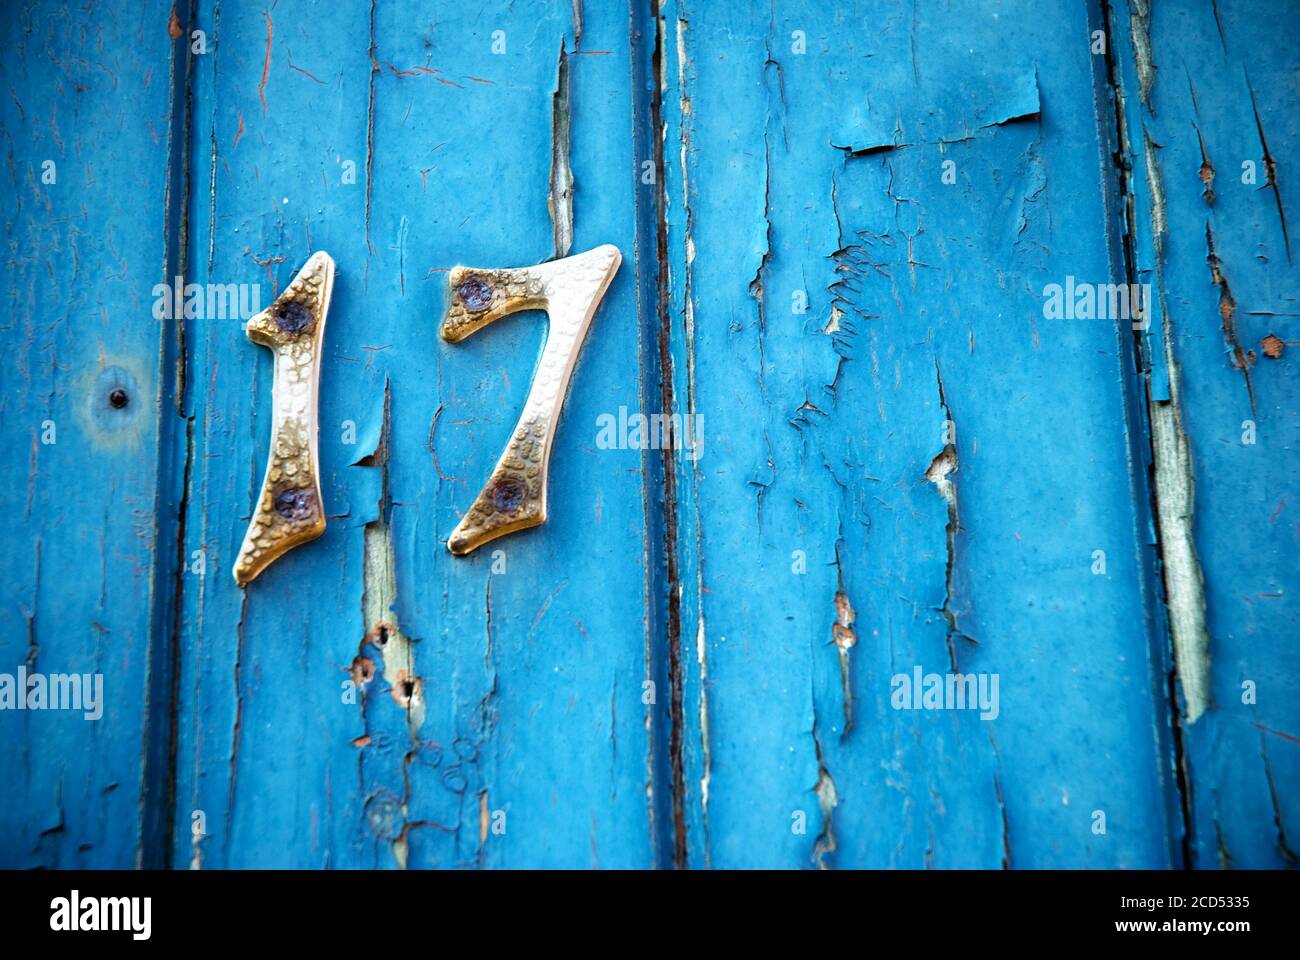 Number 17 - distressed paintwork Stock Photo